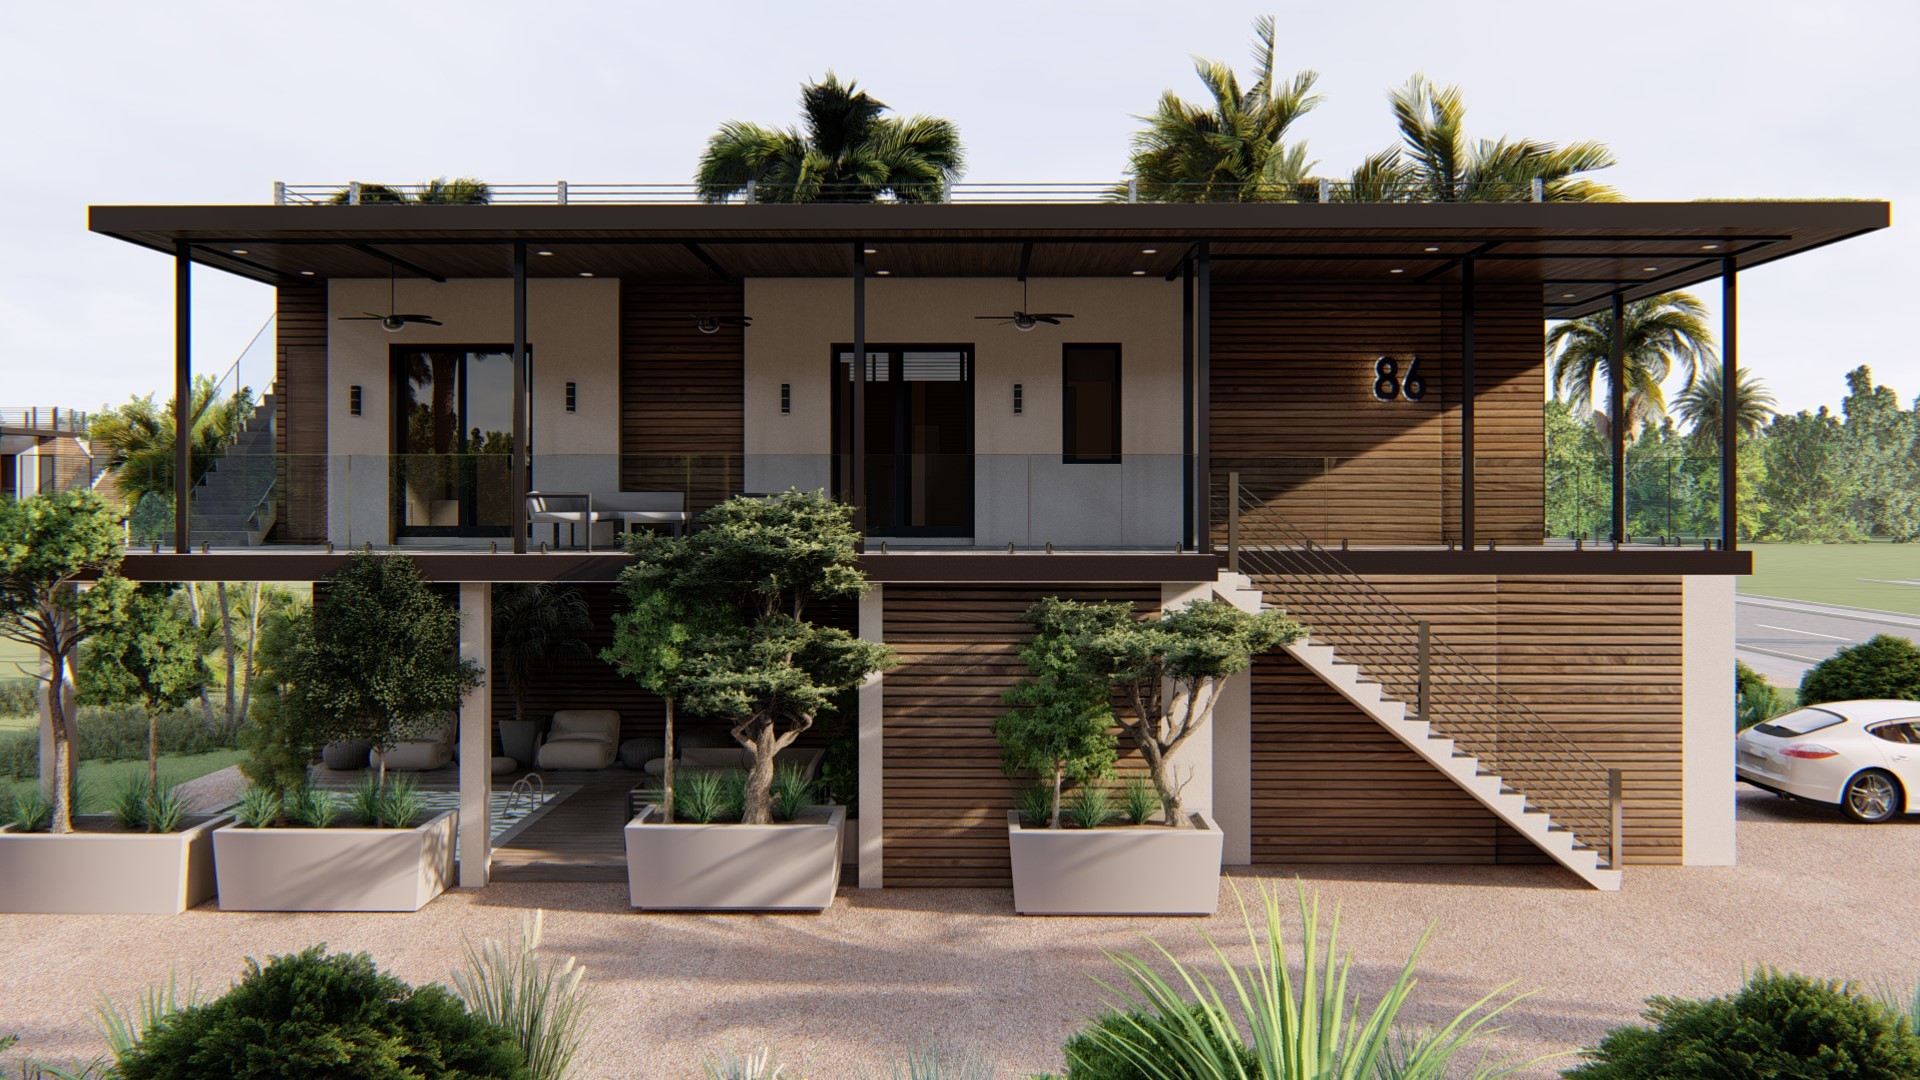 Courtesy. A rendering of a sustainable home by Sarasota-based Pearl Homes.